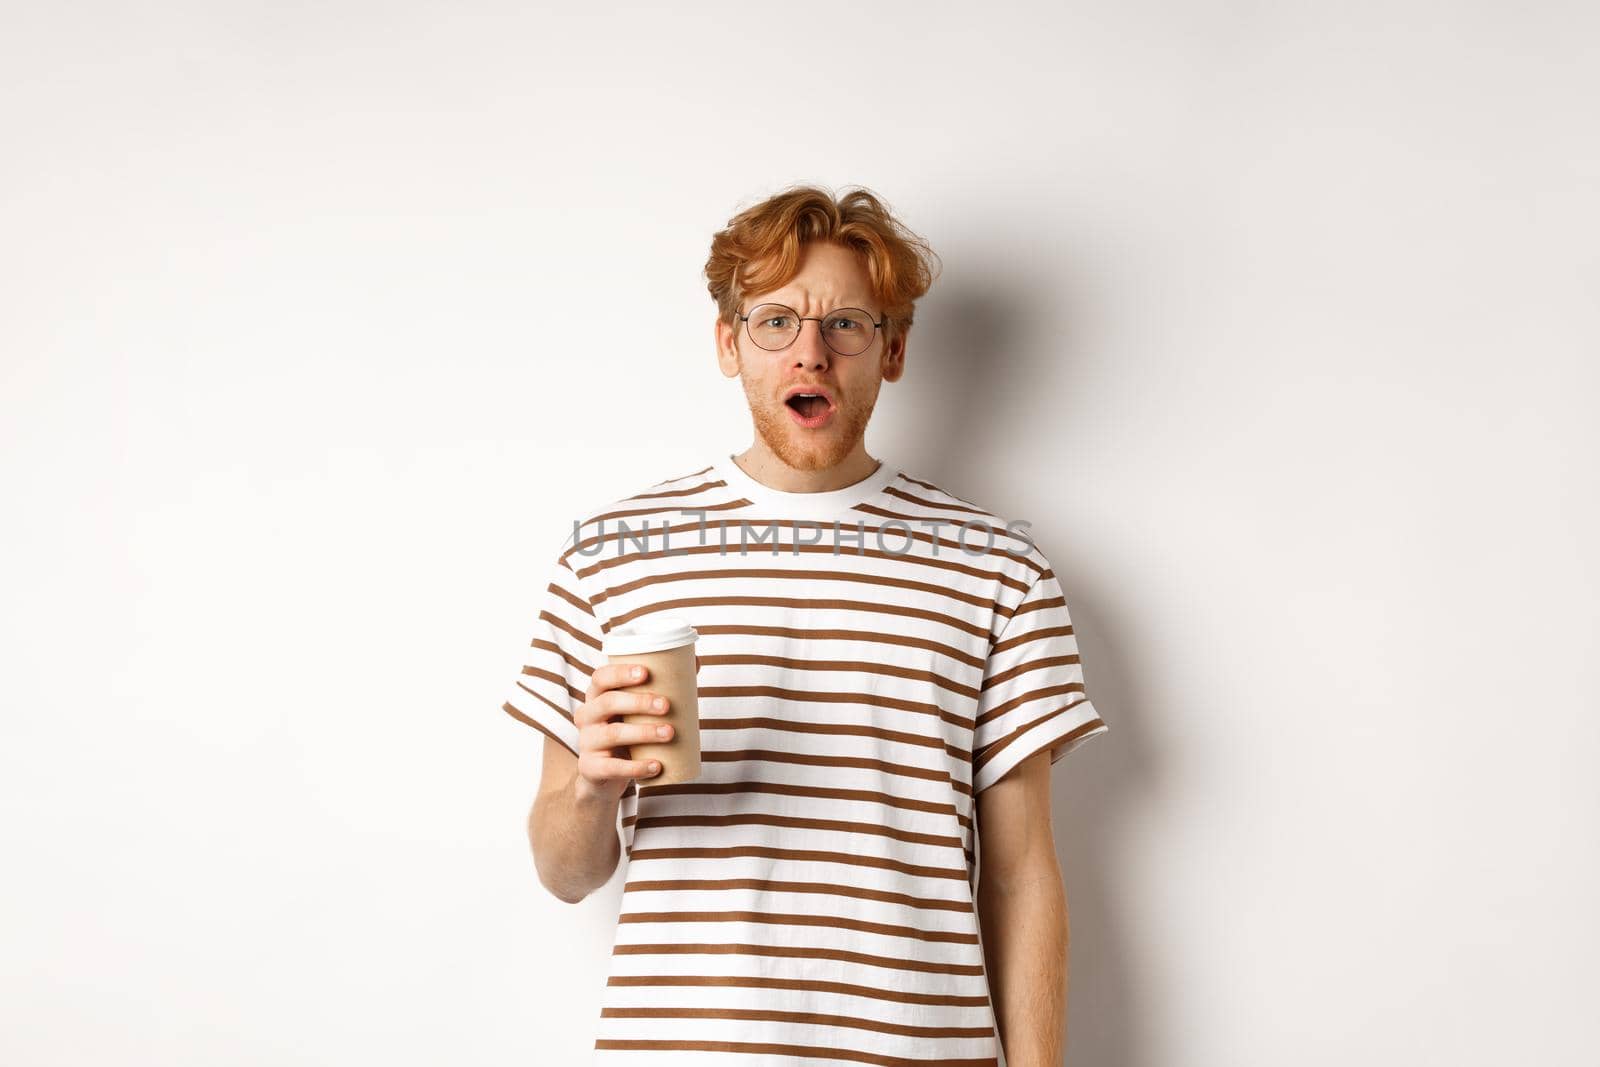 Amazed redhead man in glasses holding coffee cup and staring at camera with complete disbelief, standing in striped t-shirt against white background.